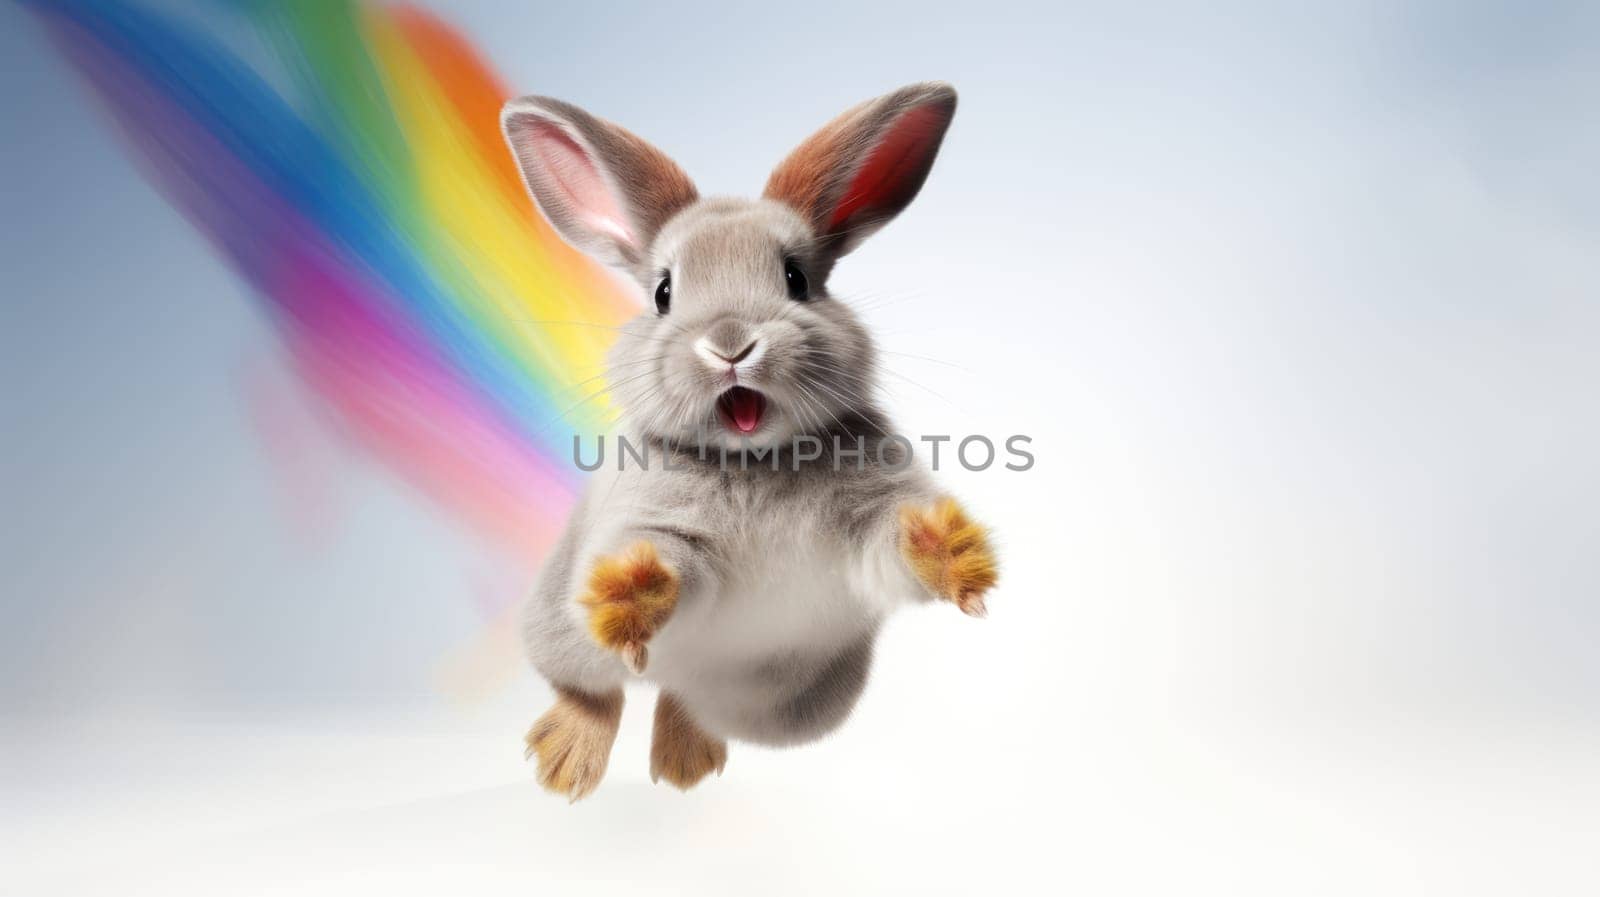 A fluffy white bunny joyfully leaps on white clouds under the bright sun, capturing natures beauty and the bunnys innocence, bringing joy and wonder.